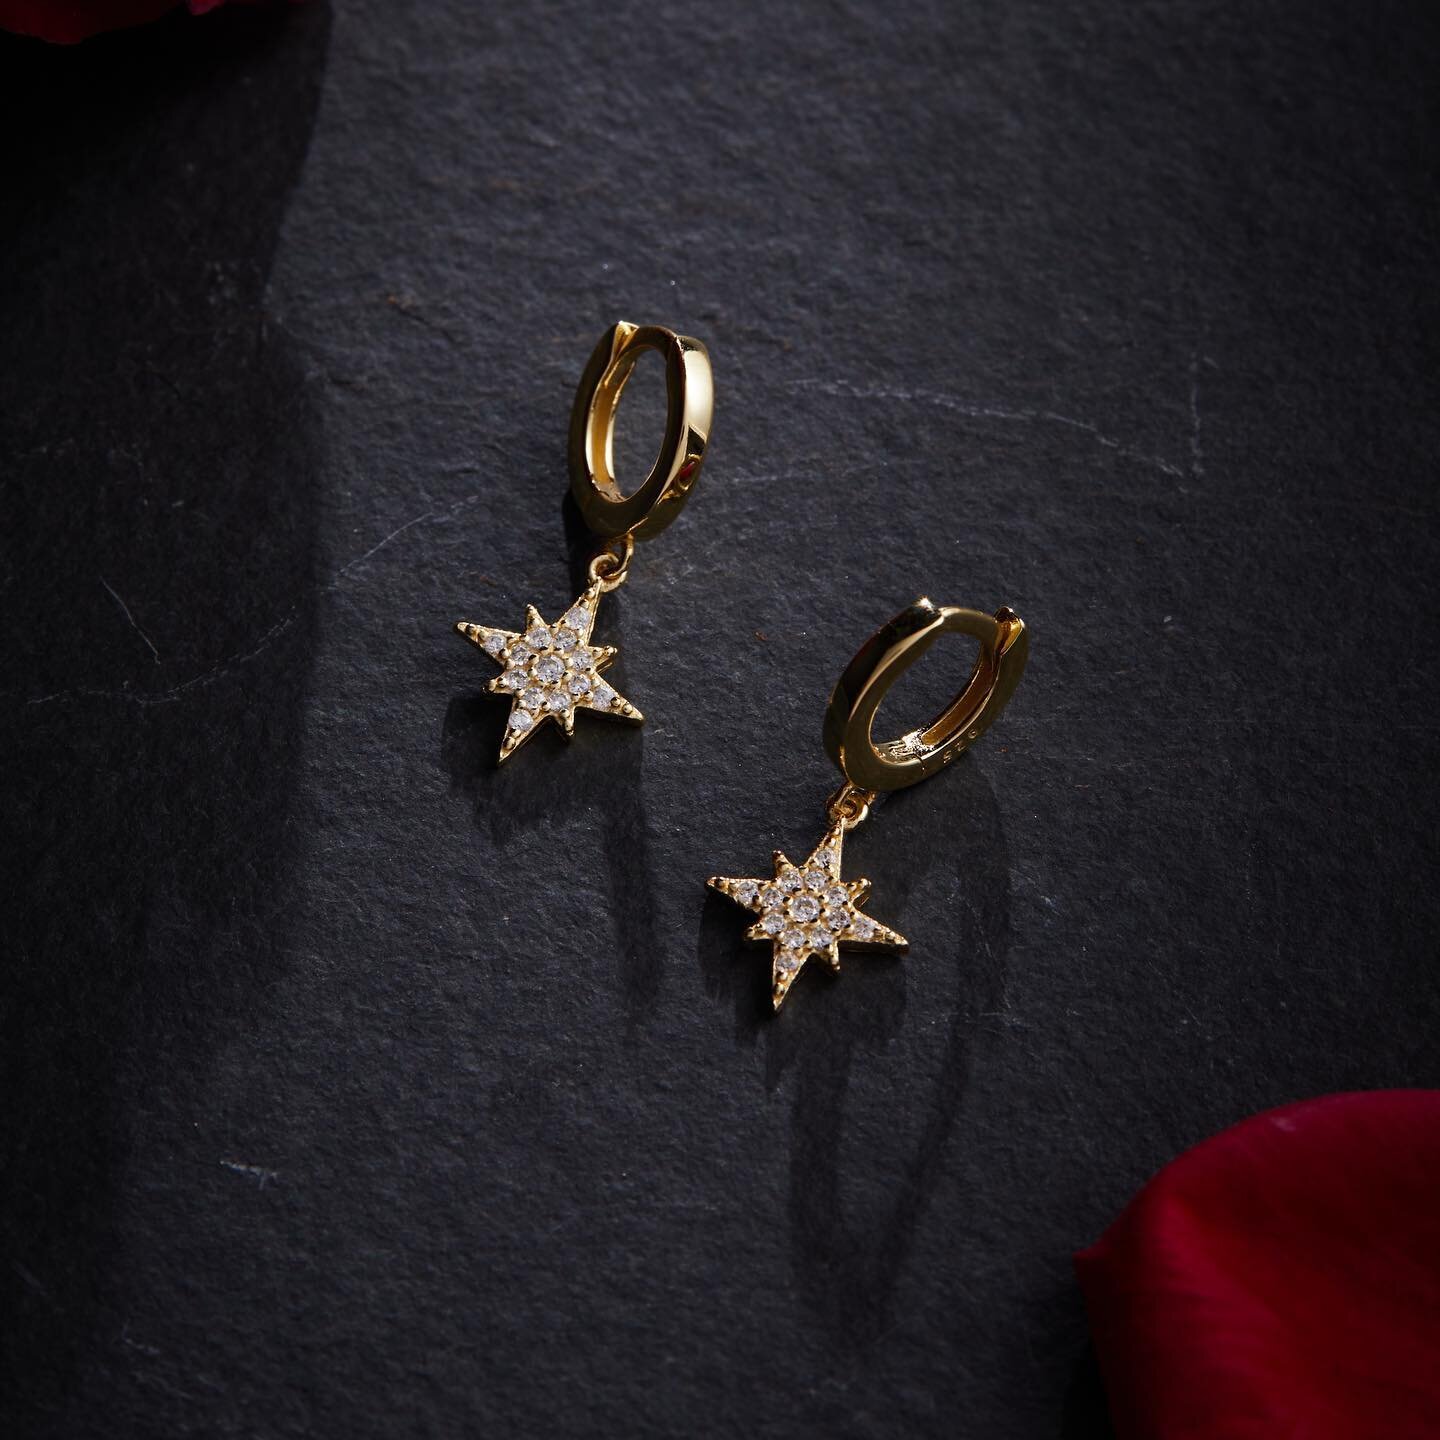 The North Star Mini hoops 💫 Subtle sparkle for a touch of magic.
.
.
.

#jewelry #jewelrydesigner #jewelrybusiness #925silver #925sterlingsilver #goldjewelry #witchyvibes #bohostyle #celestial #celestialjewelry #jewelryblogger #showmeyourrings #show